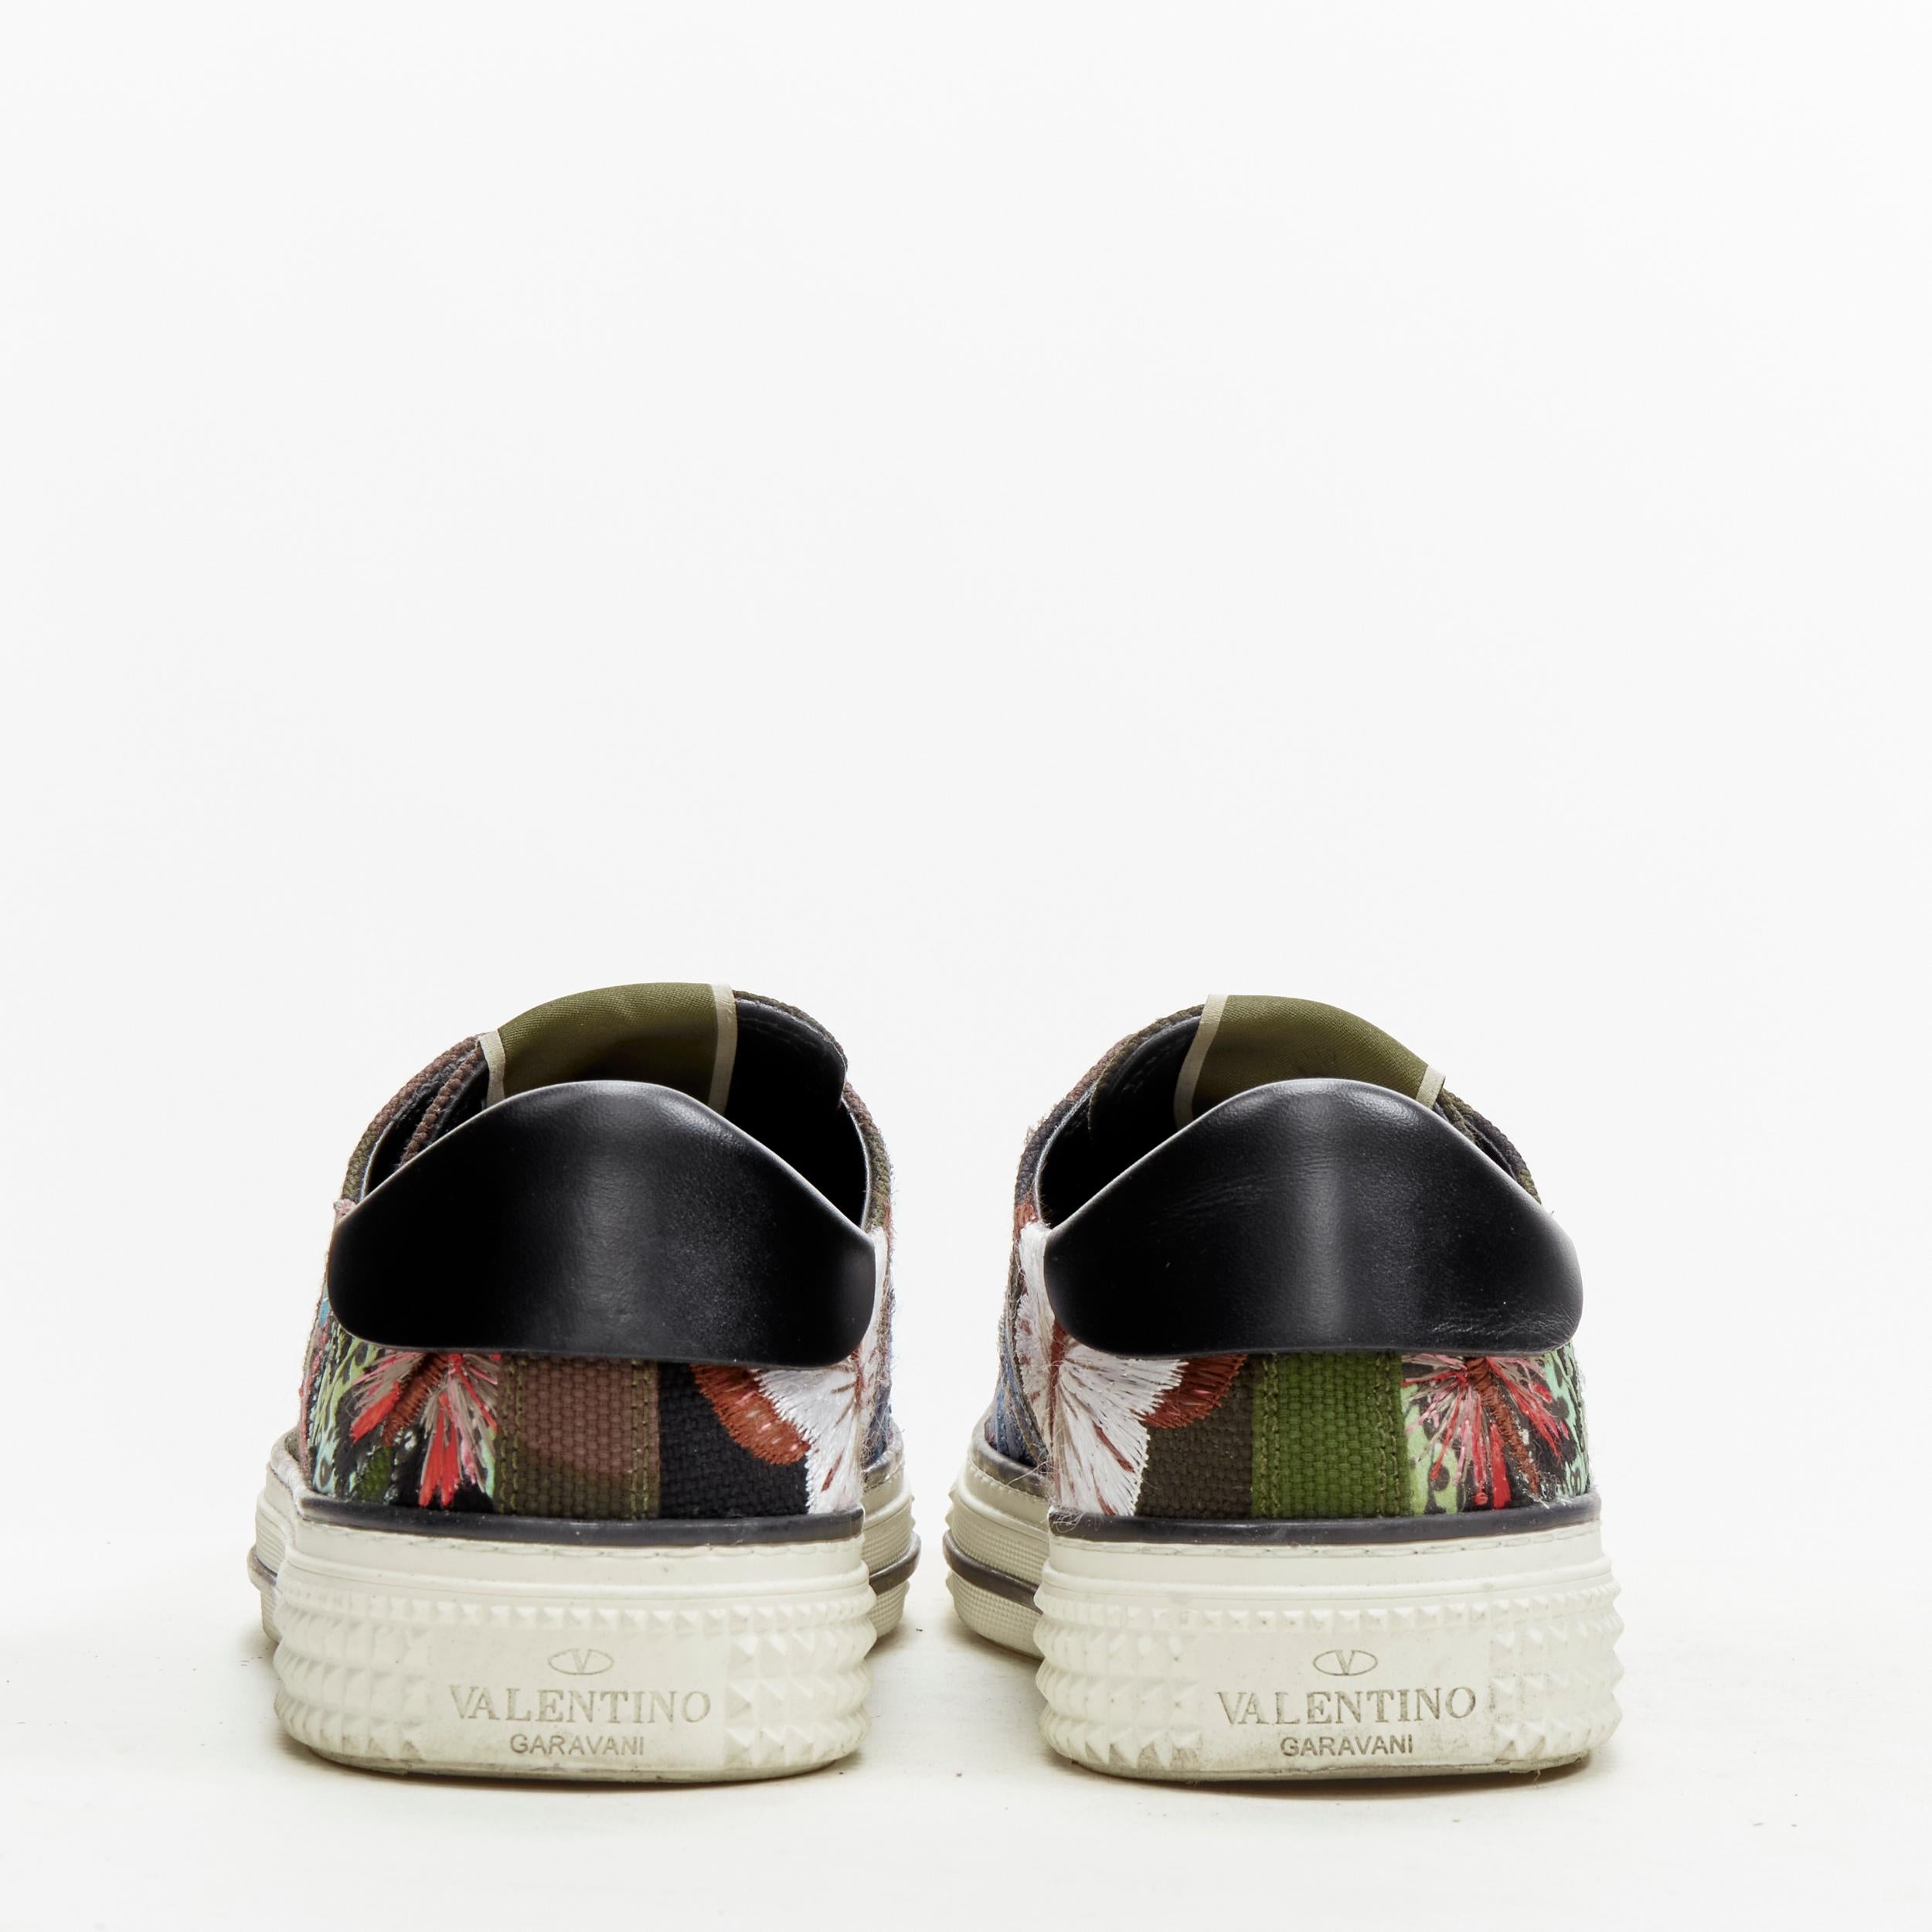 VALENTINO Butterfly embroidery green camouflage low top sneaker EU36 2